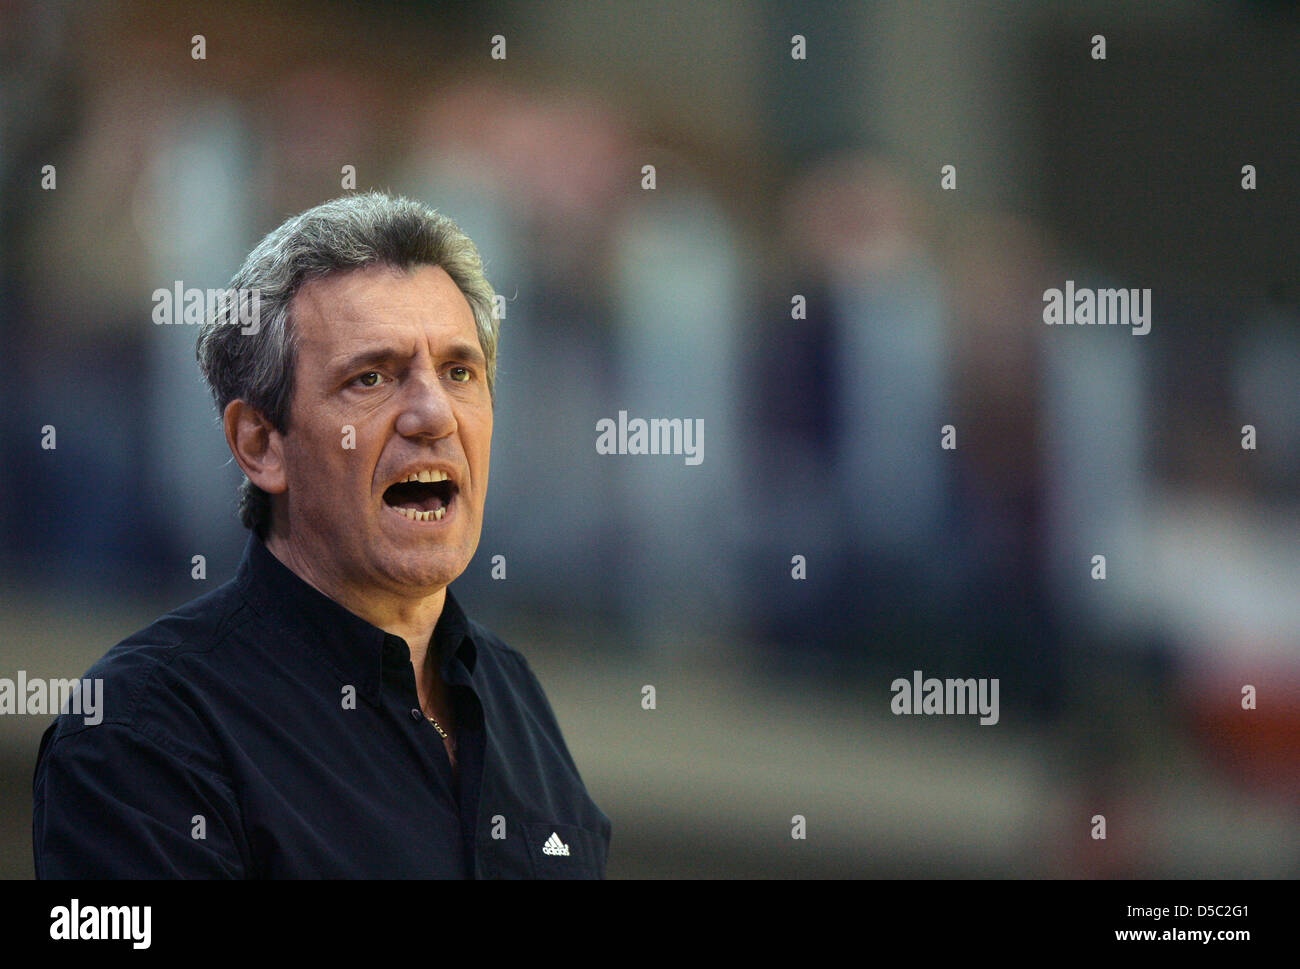 French head coach Claude Onesta pictured at the sideline during the Handball Euro 2010 group 2 main round match Slovenia vs France in Innsbruck, Austria, 26 January 2010. Photo: Jens Wolf Stock Photo